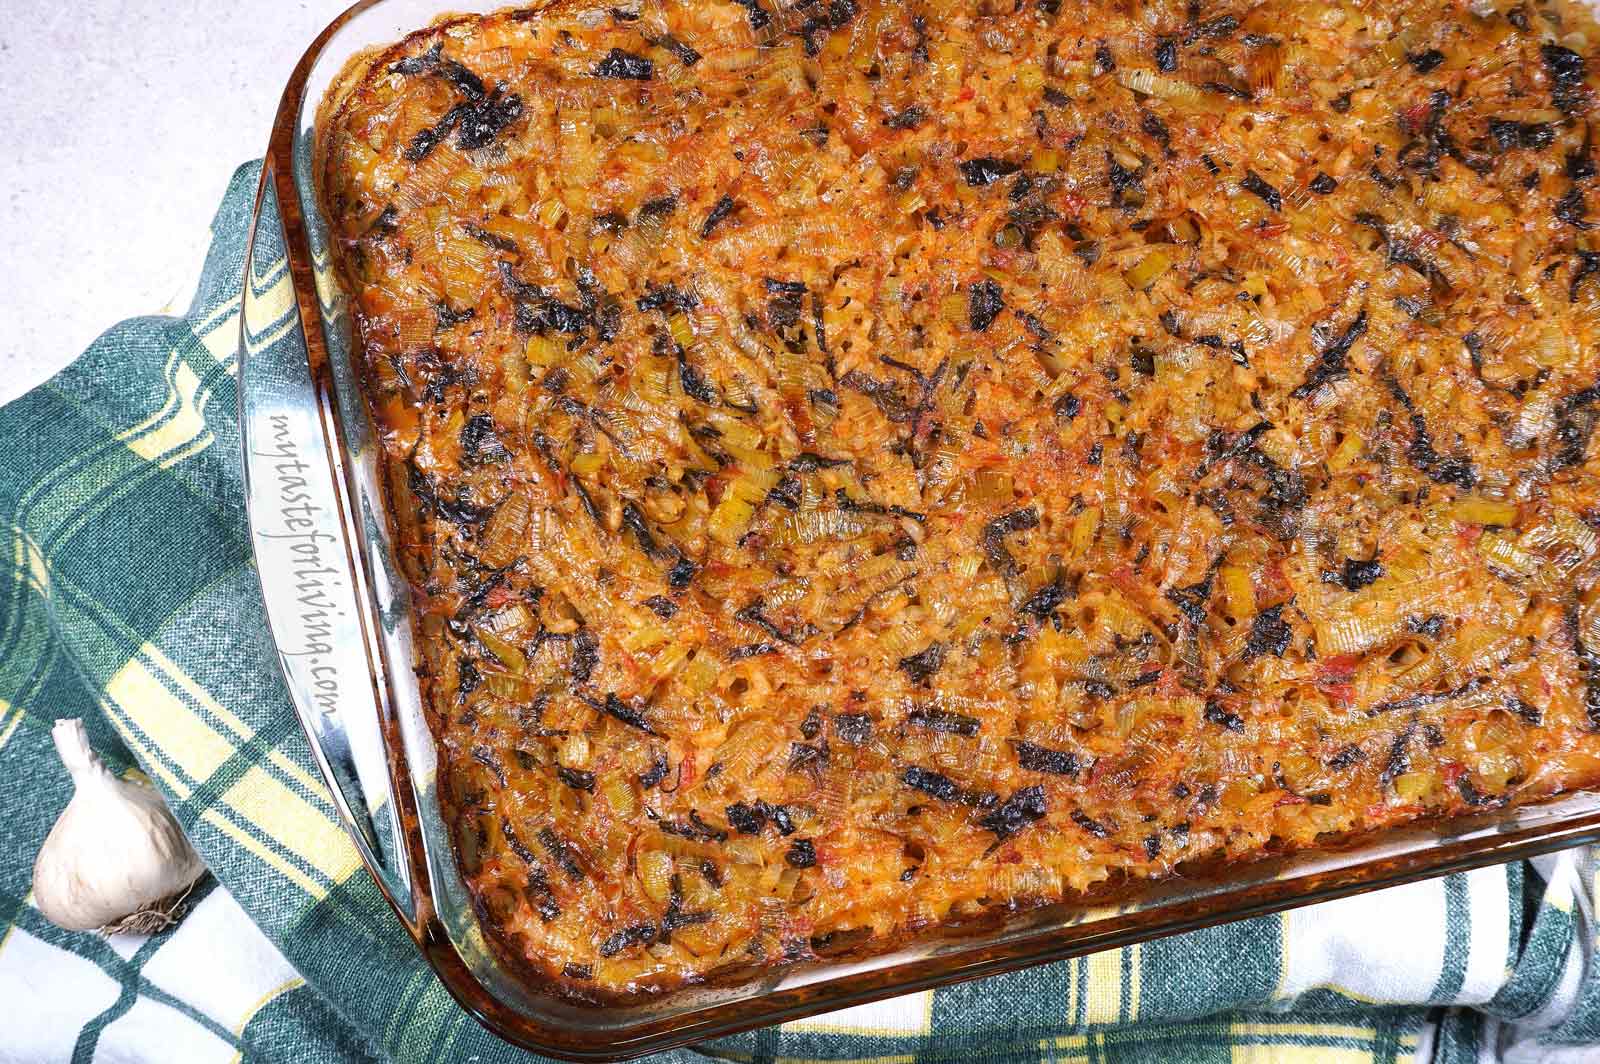 It's spring! Once the dock has sprouted in the garden, I must make this recipe - baked rice with leeks, tomatoes and dock. You can replace the dock with spinach, you can also use a larger amount than indicated in the recipe according to your taste.